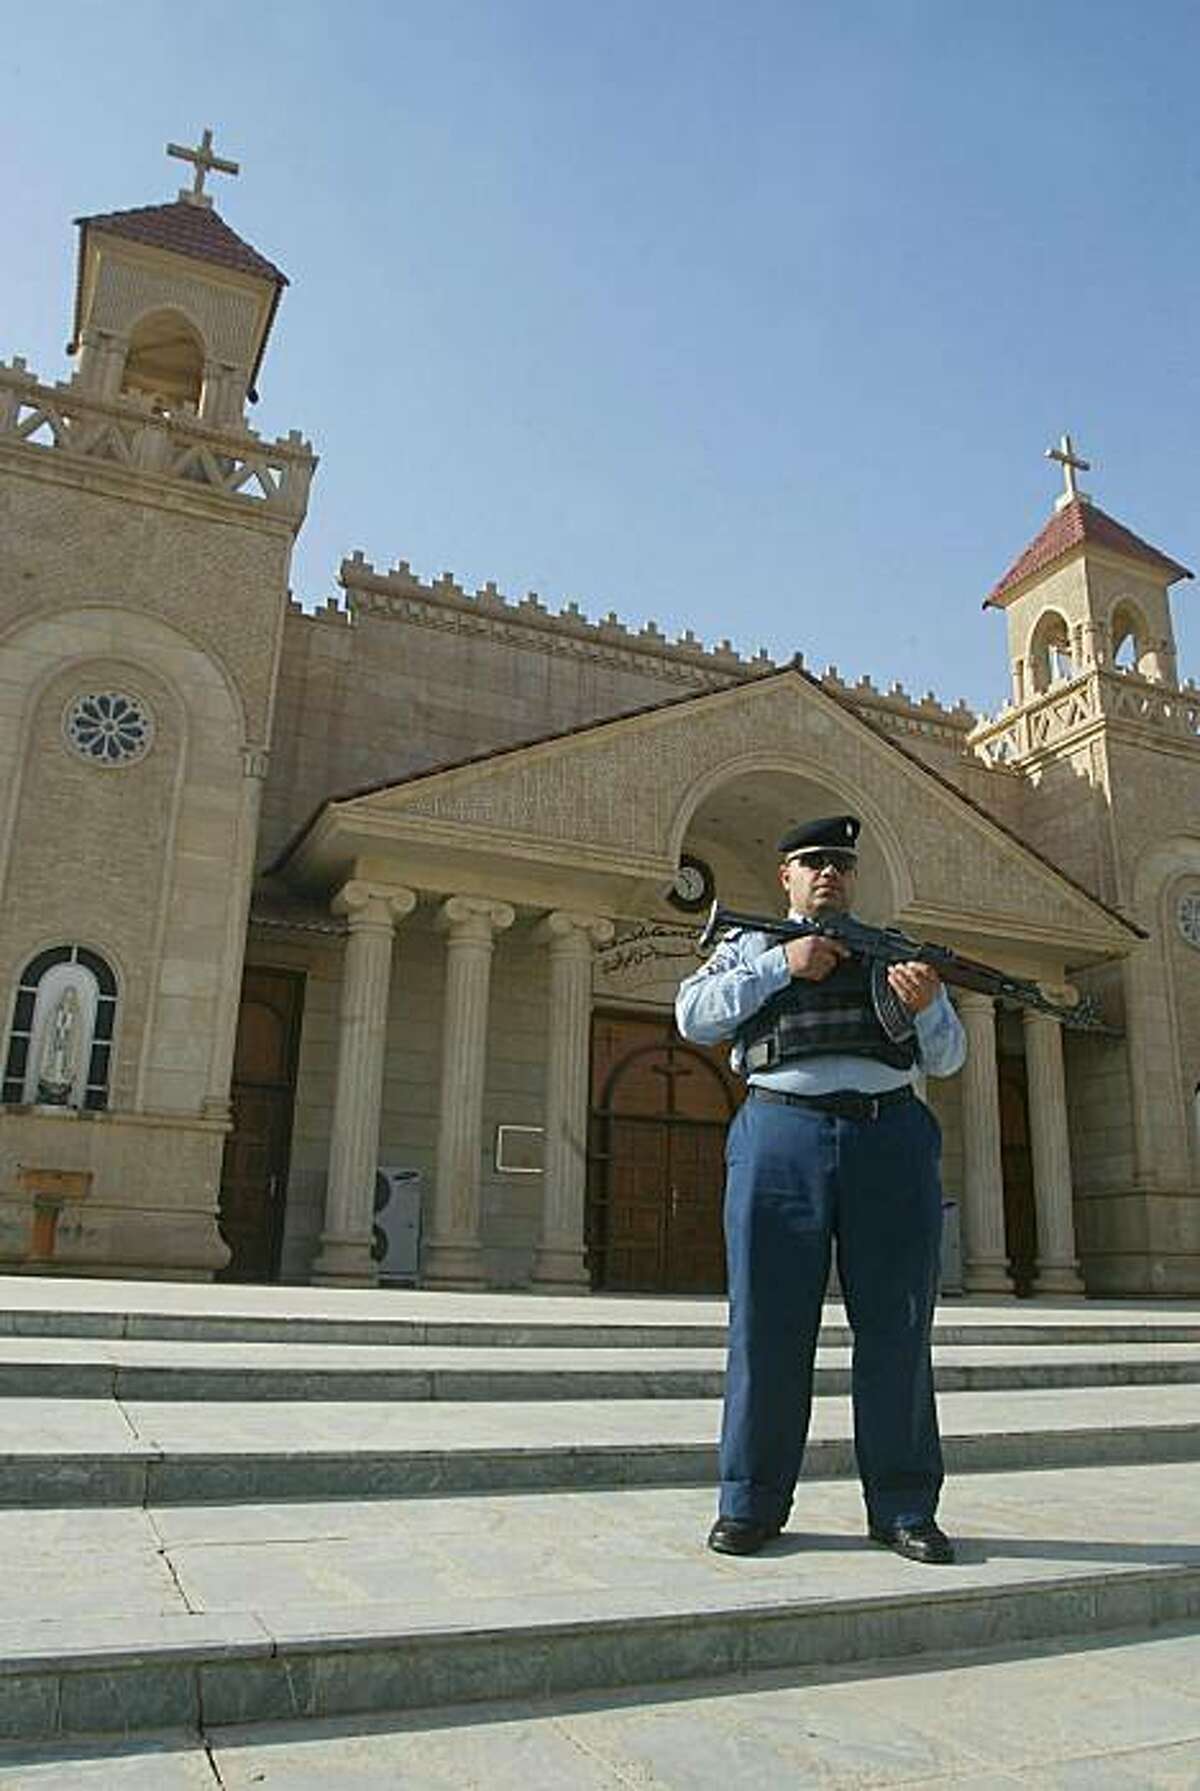 An Iraqi policeman stands guard outside a church in the ethnically mixed northern Iraqi city of Kirkuk on December 21, 2010 as part of security measures to protect Christians, after 44 worshippers were killed in a late October attack on a Baghdad church.